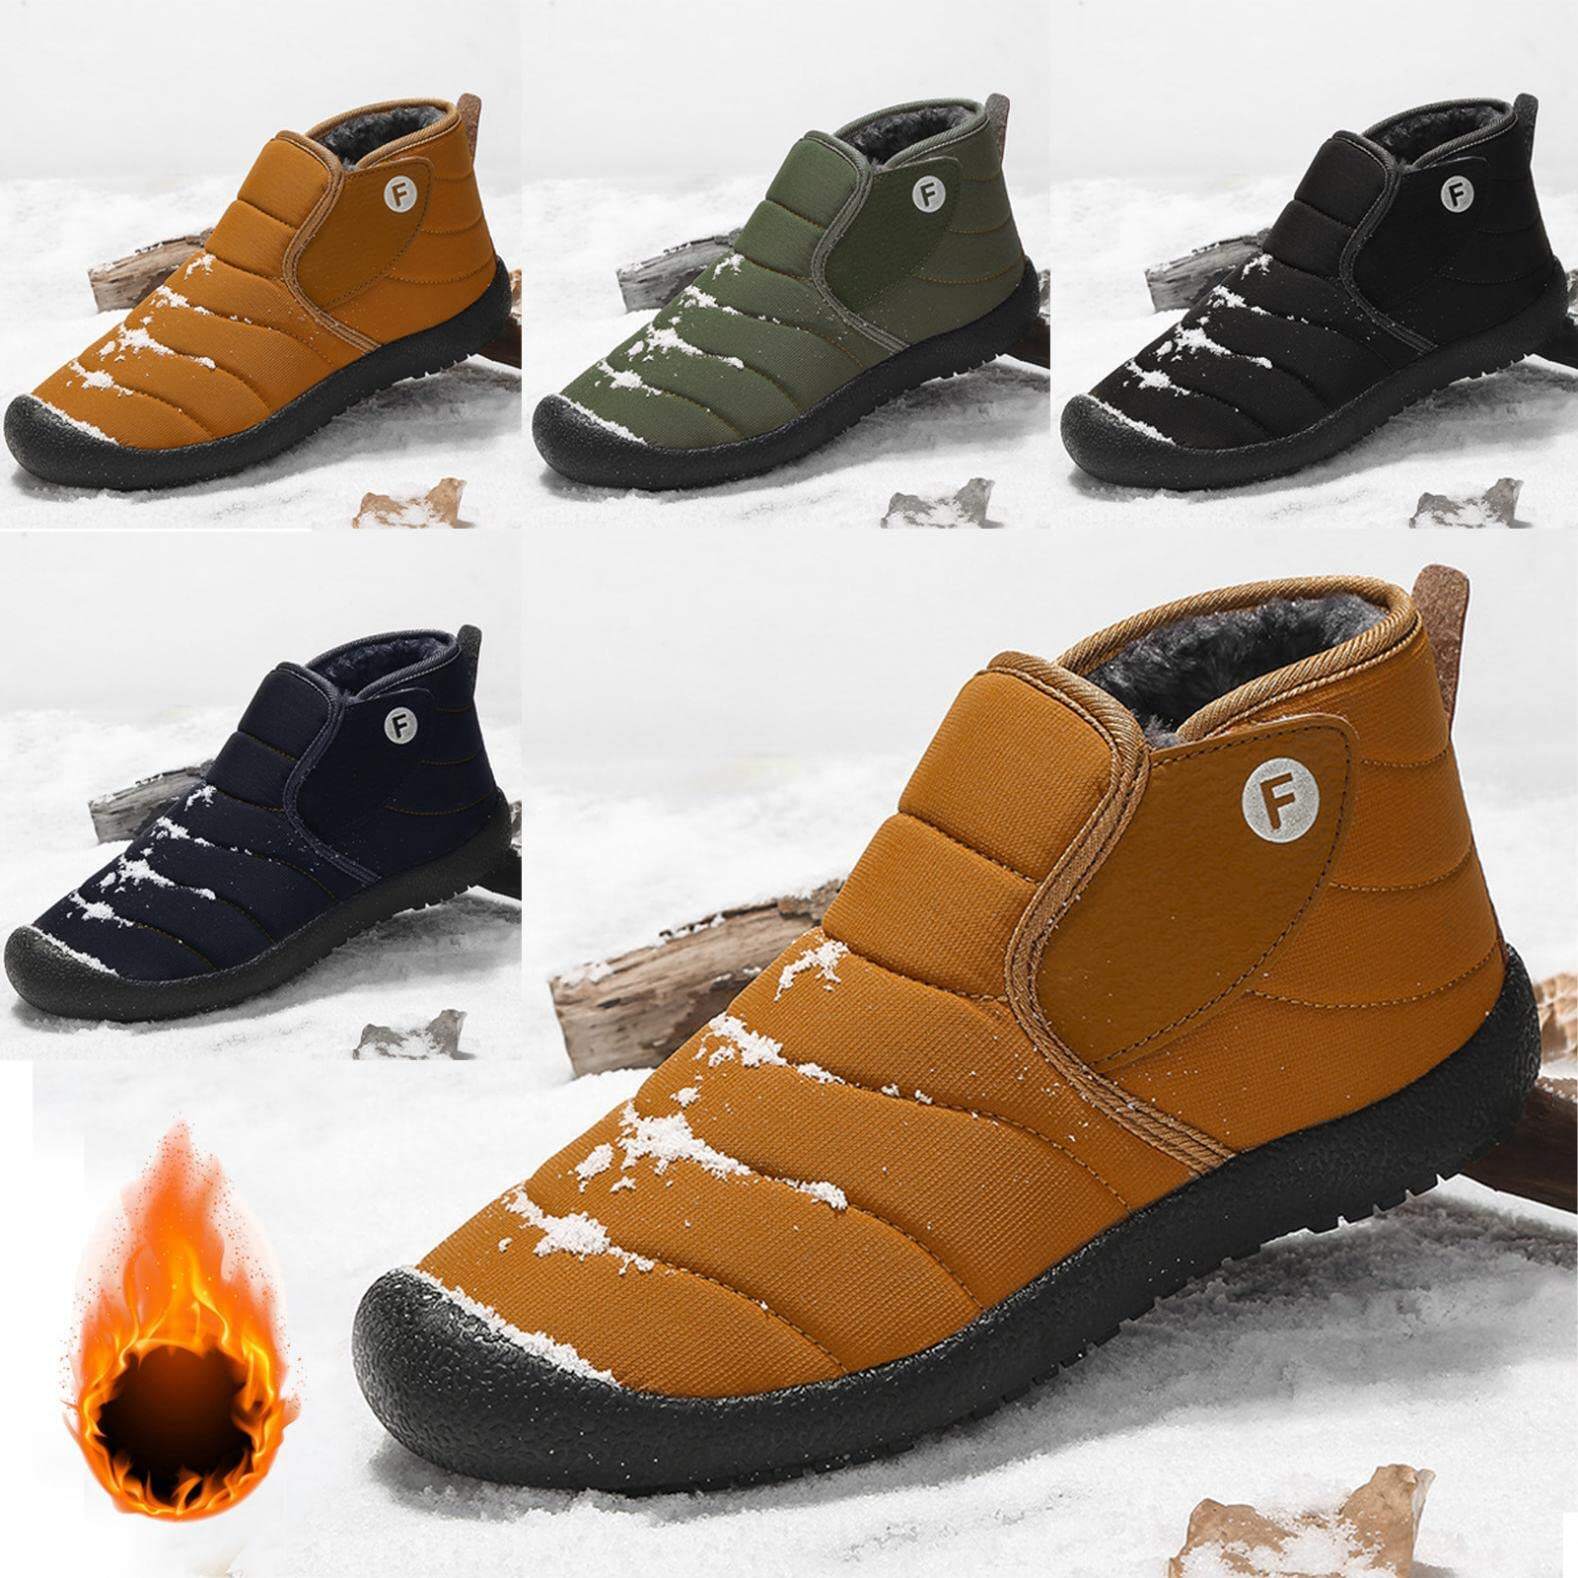 ✨70% OFF TODAY✨Waterproof Boots Comfortable for Winter